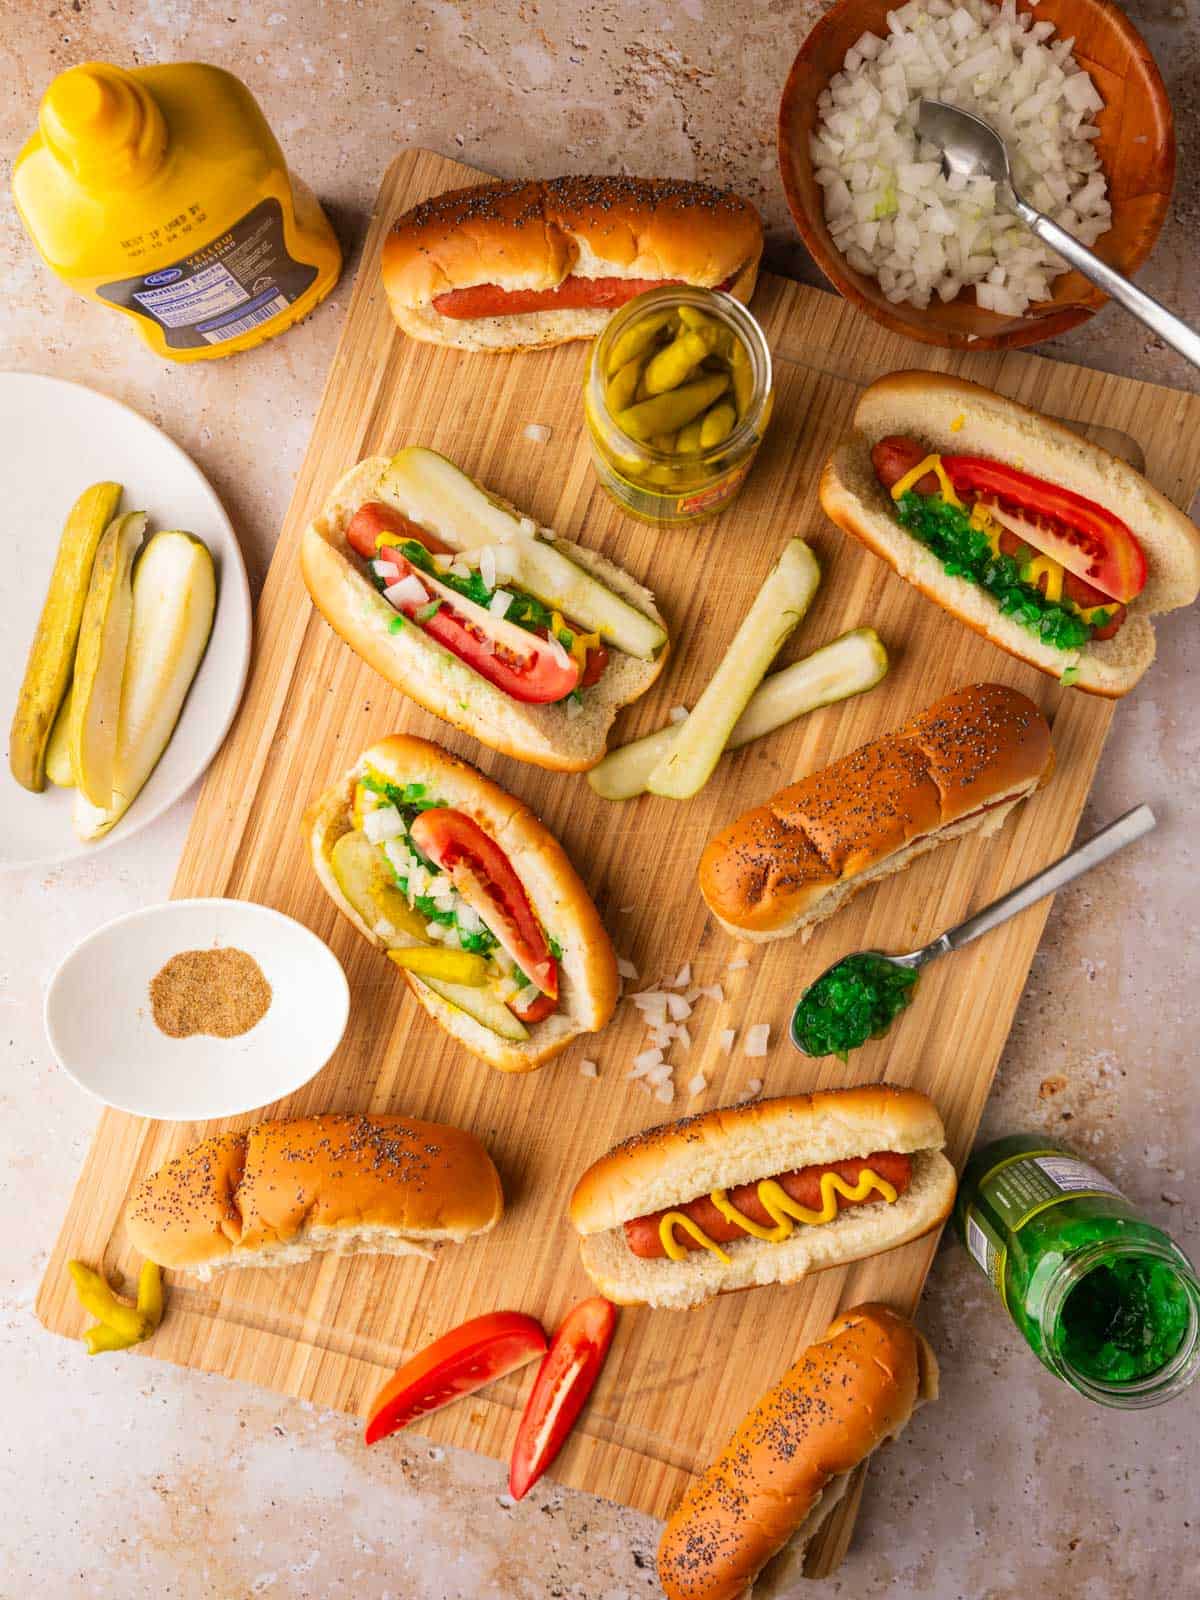 hot dogs on cutting board with some toppings on them and around in bowls and containers.